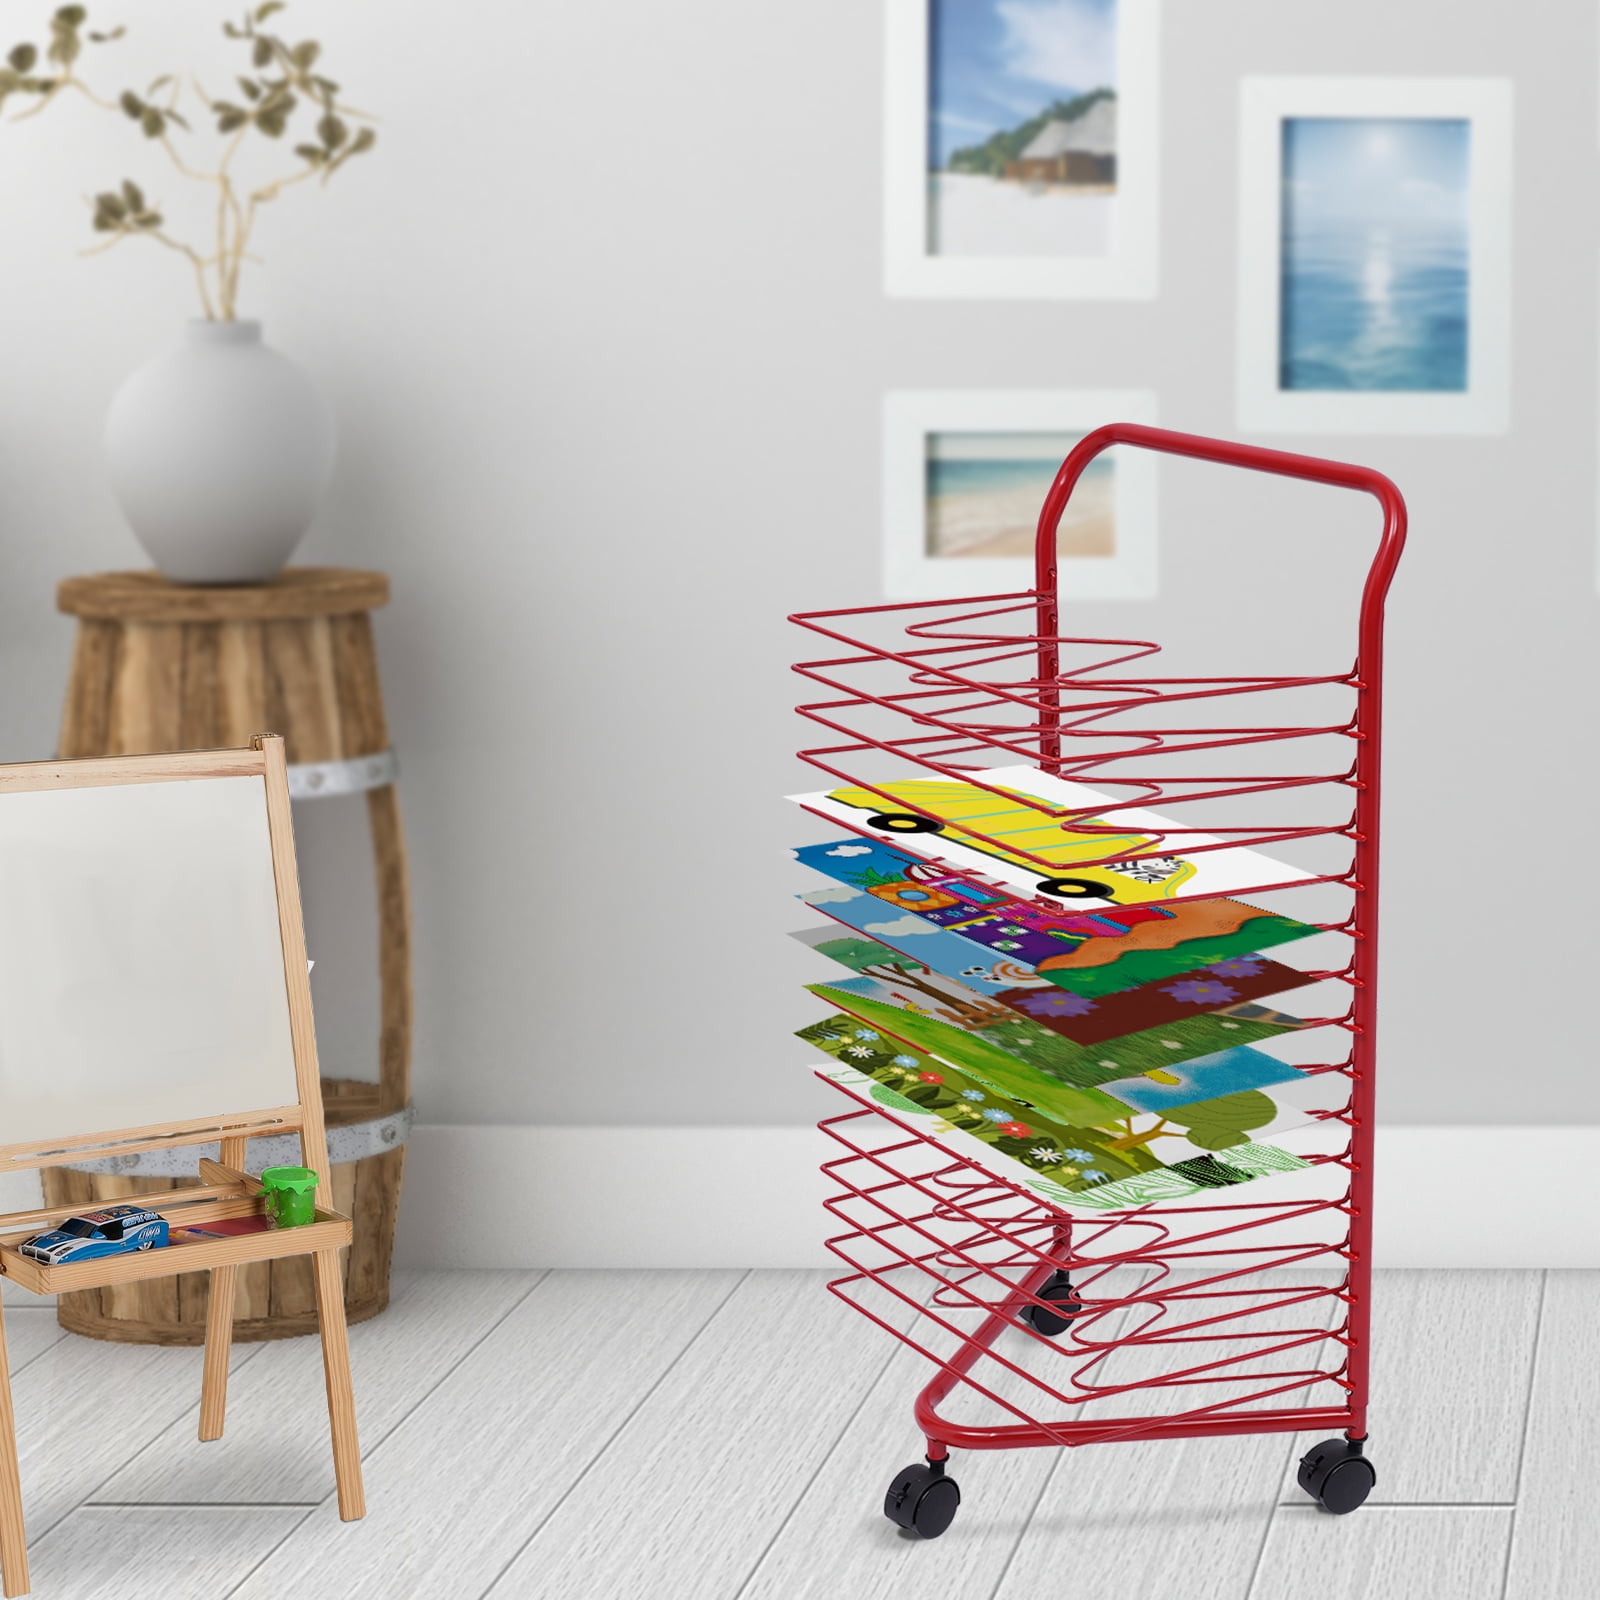 LOYALHEARTDY Small Art Drying Rack, Red Cast Iron Artists Drying Racks on  Wheels, 16 Shelves Classroom Art Storage Rack for A2, A3, A4 Paper